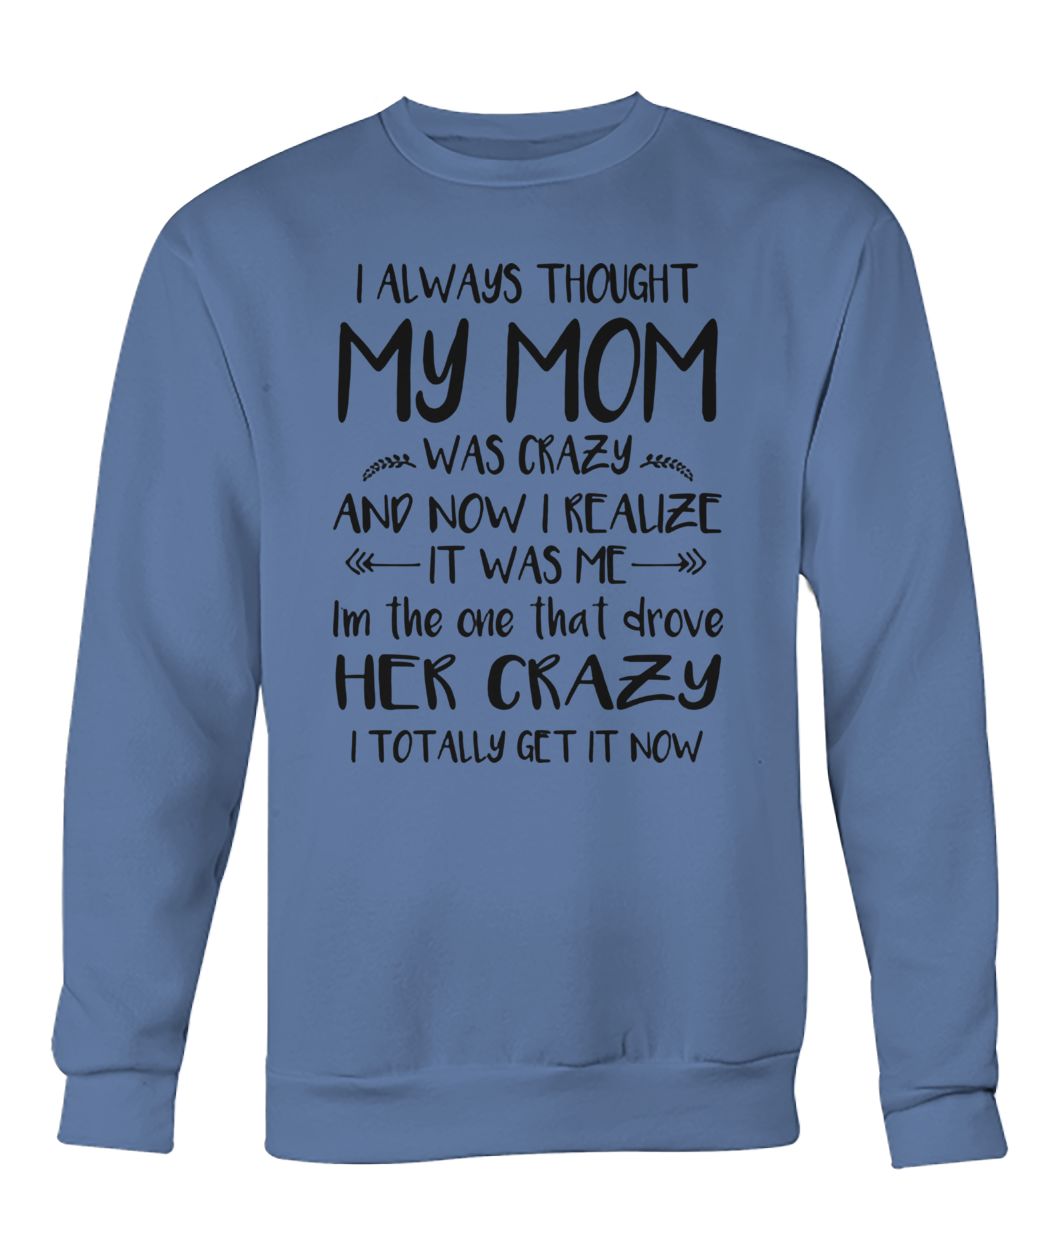 I always thought my mom was crazy and now I realize it was me crew neck sweatshirt